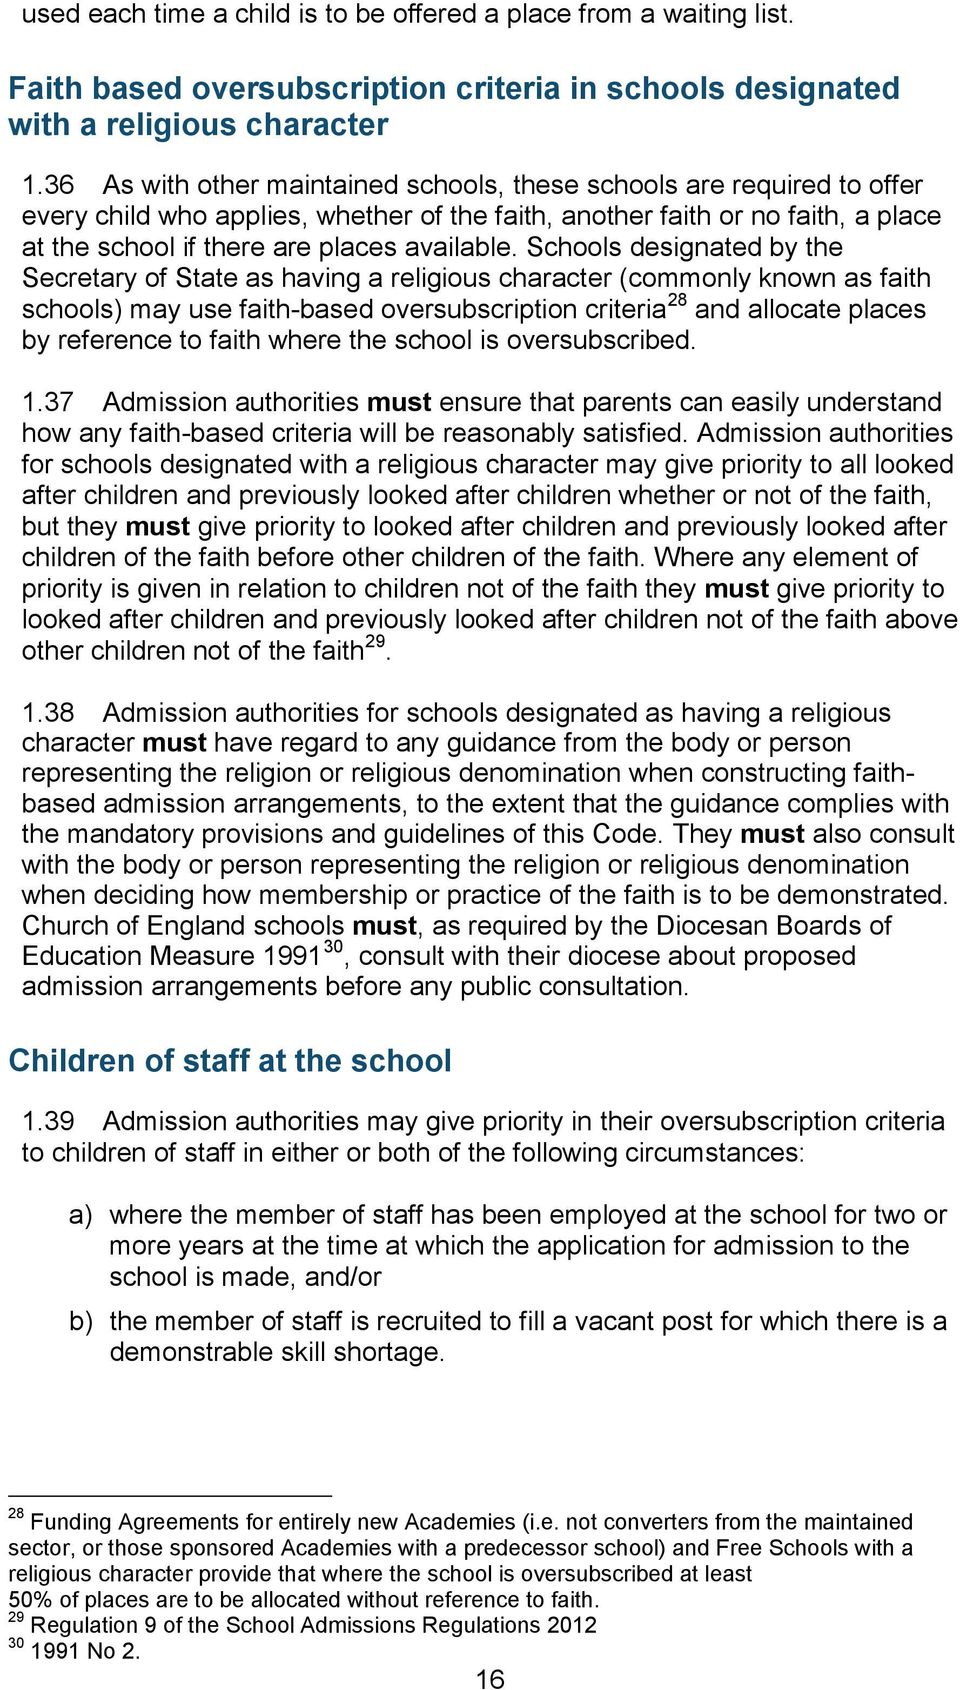 Schools designated by the Secretary of State as having a religious character (commonly known as faith schools) may use faith-based oversubscription criteria 28 and allocate places by reference to